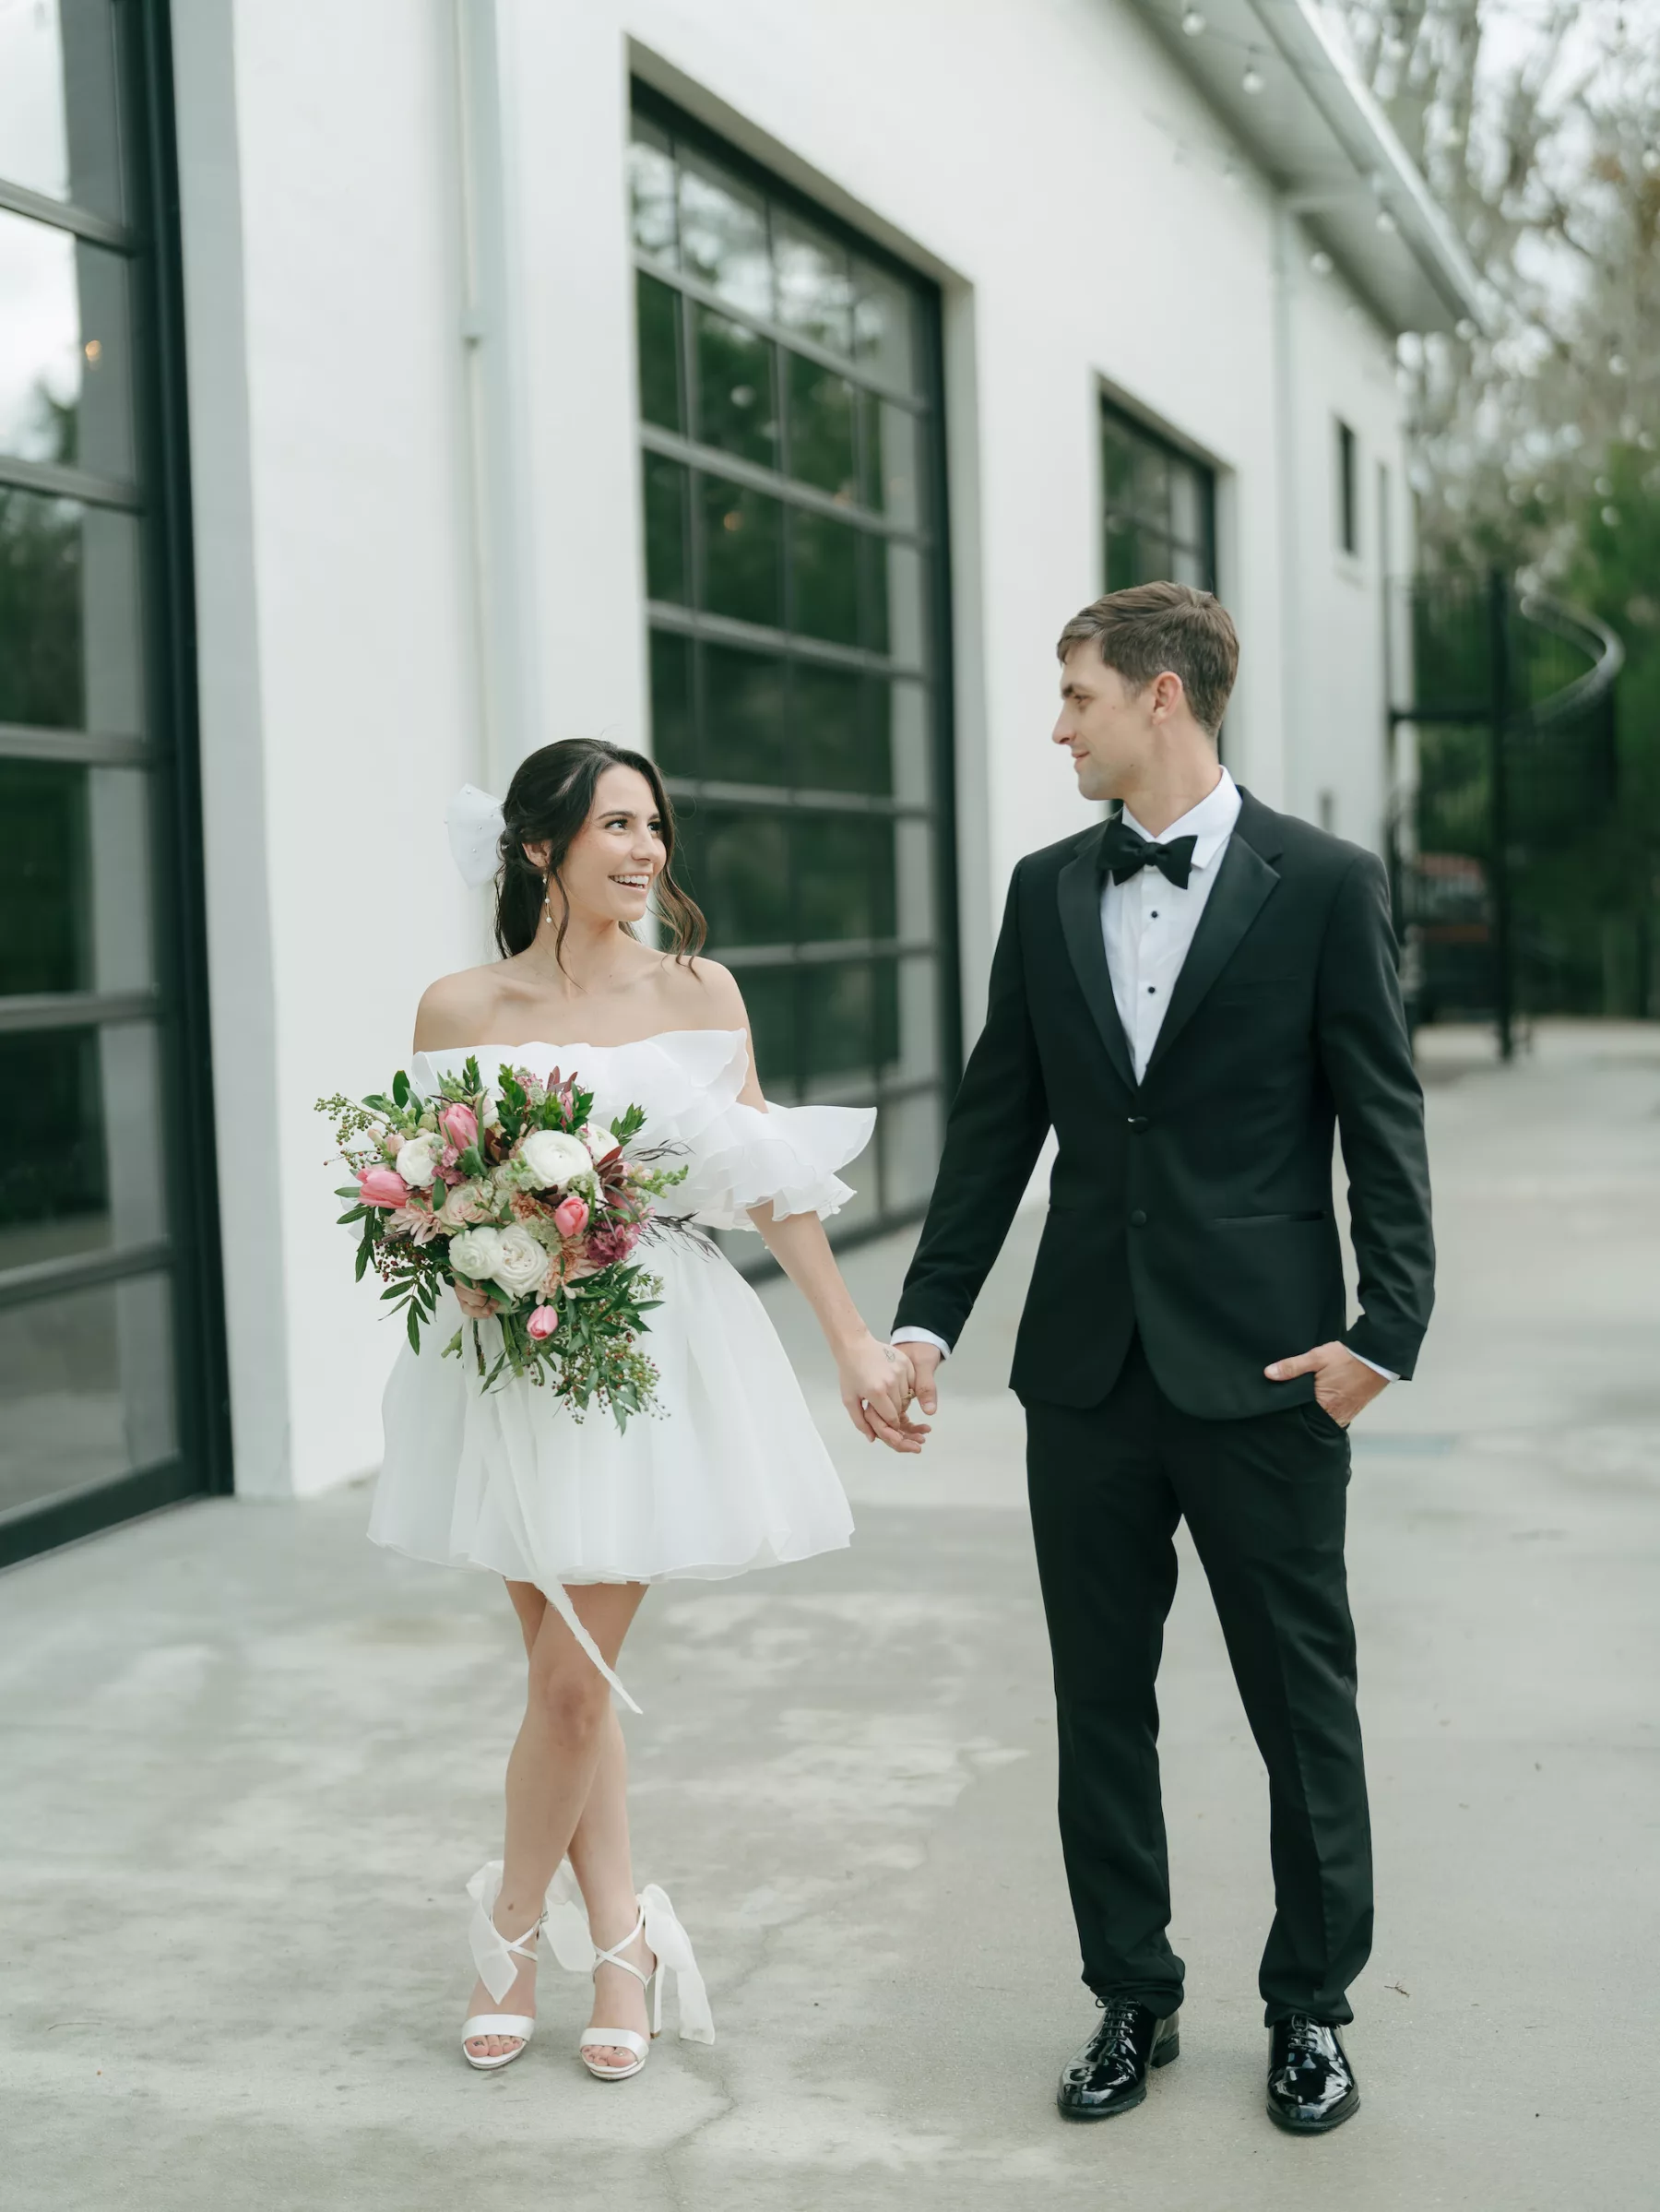 Bride and Groom Just Married Wedding Portrait | Tampa Bay Photographer Amber Yonker Photography | Florist Save The Date Florida